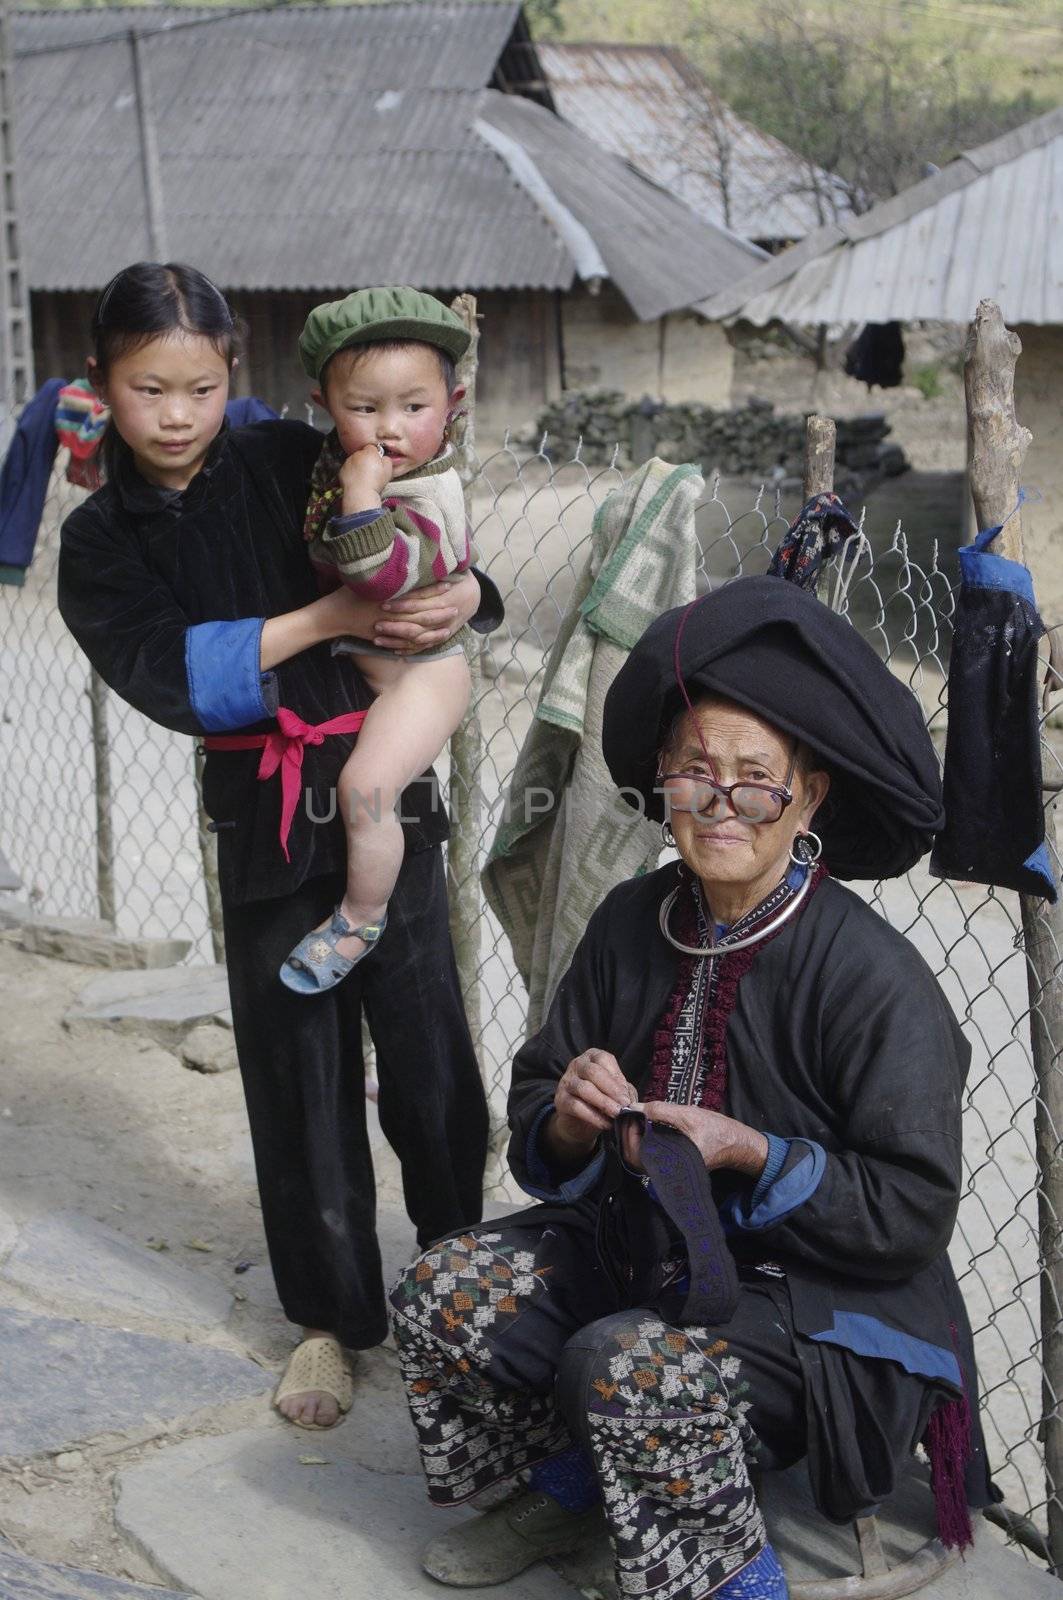 Grandmother Black Dao ethnic with small children by Duroc